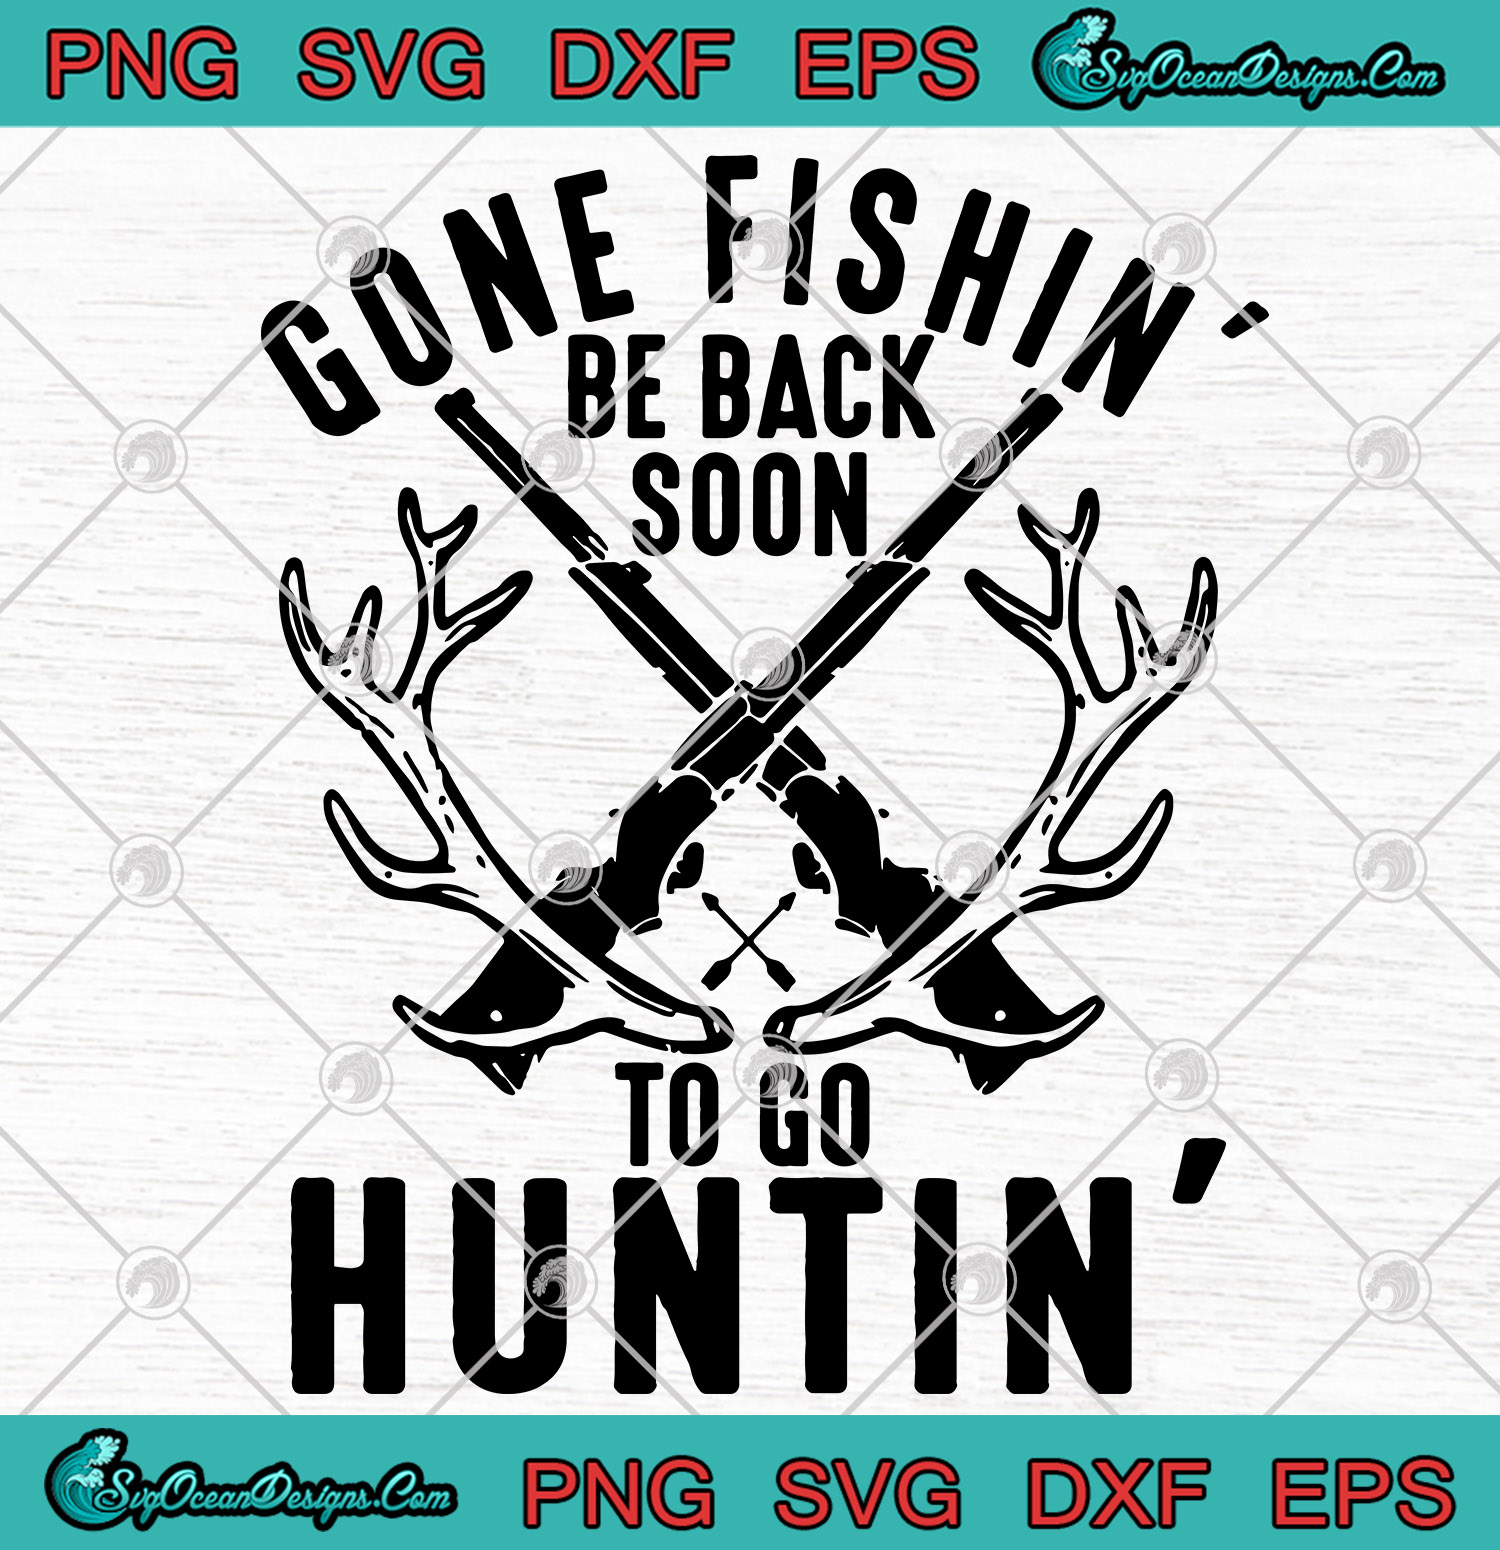 Download Gone Fishing Be Back Soon To Go Hunting SVG PNG EPS DXF Designs for shirt - Designs Digital Download